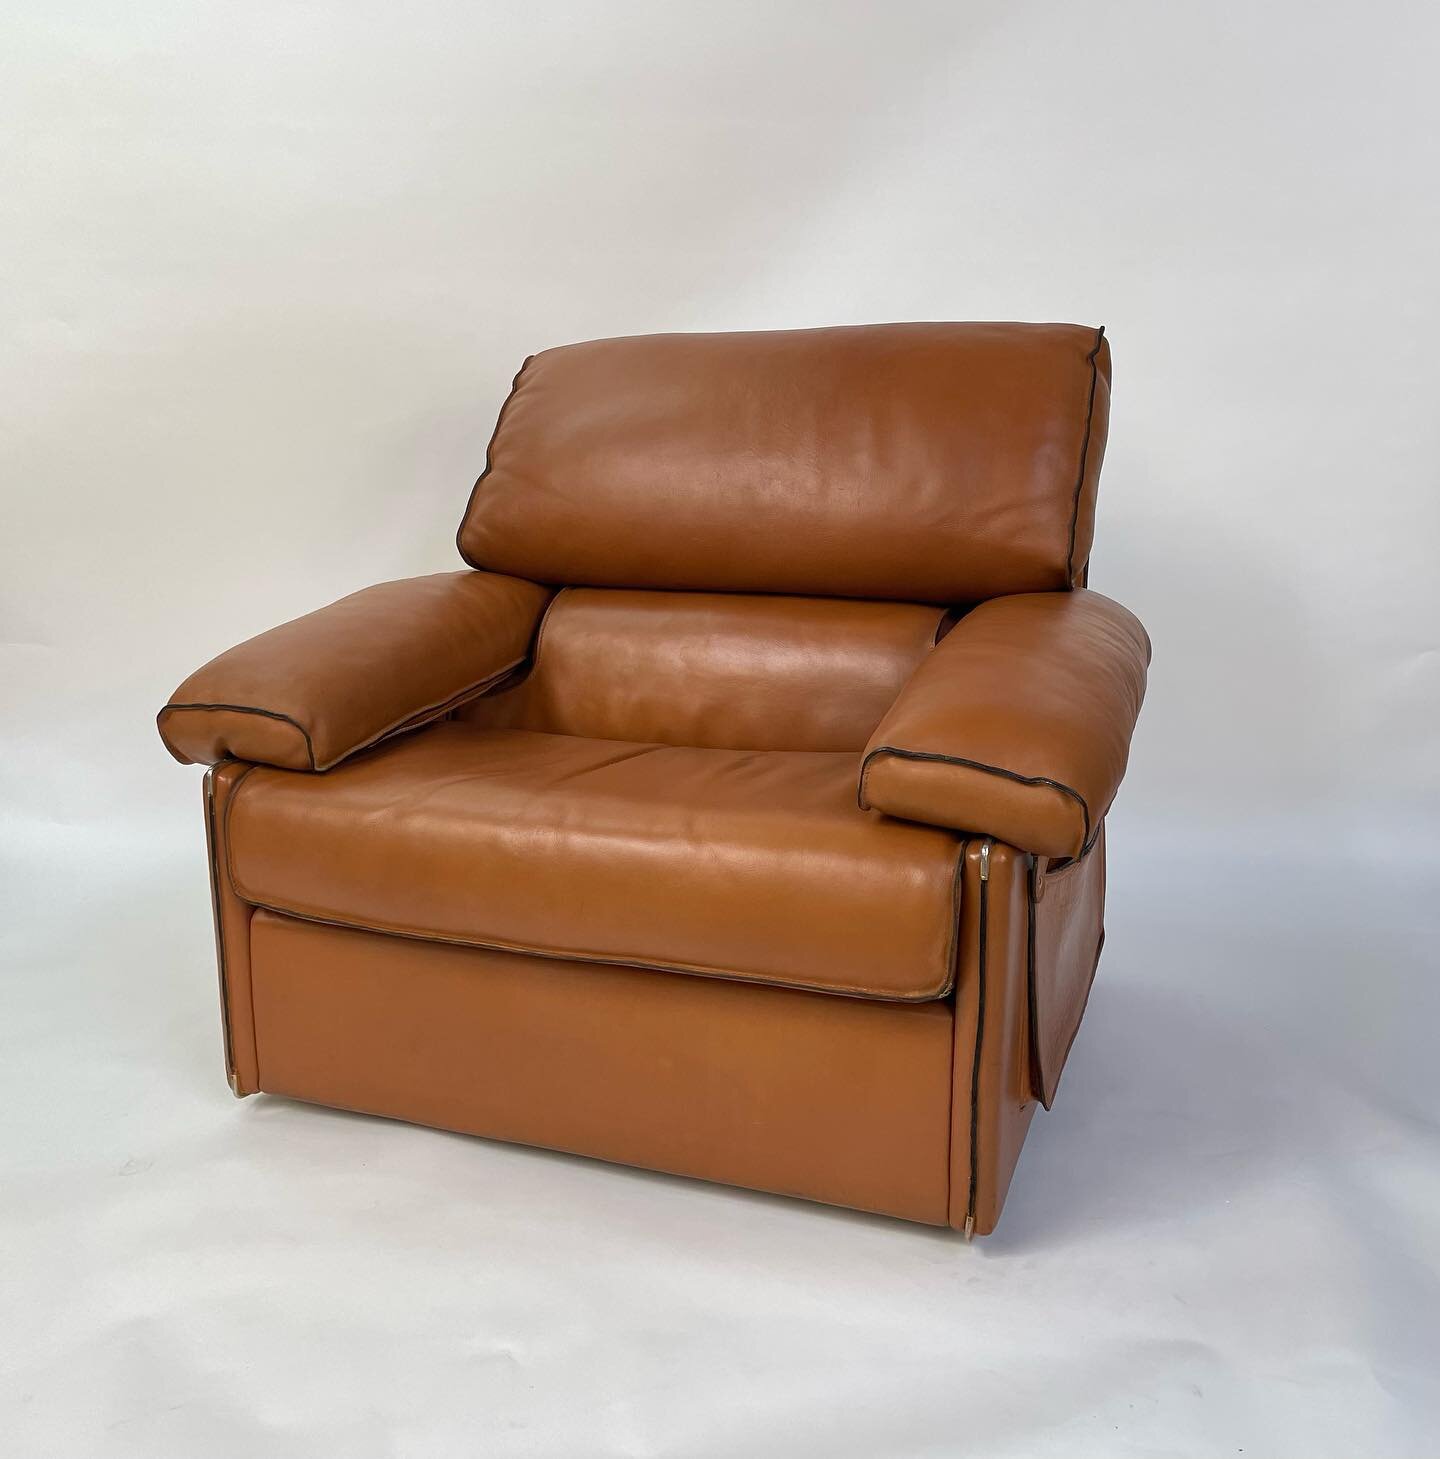 Here we a have a wonderful example of a late 70s lounge chair. Our team installed a three part combination of geese feathers, polyfill and shredded foam in all of the cushion compartments. We also restored the color on 70% of the piece and touched up